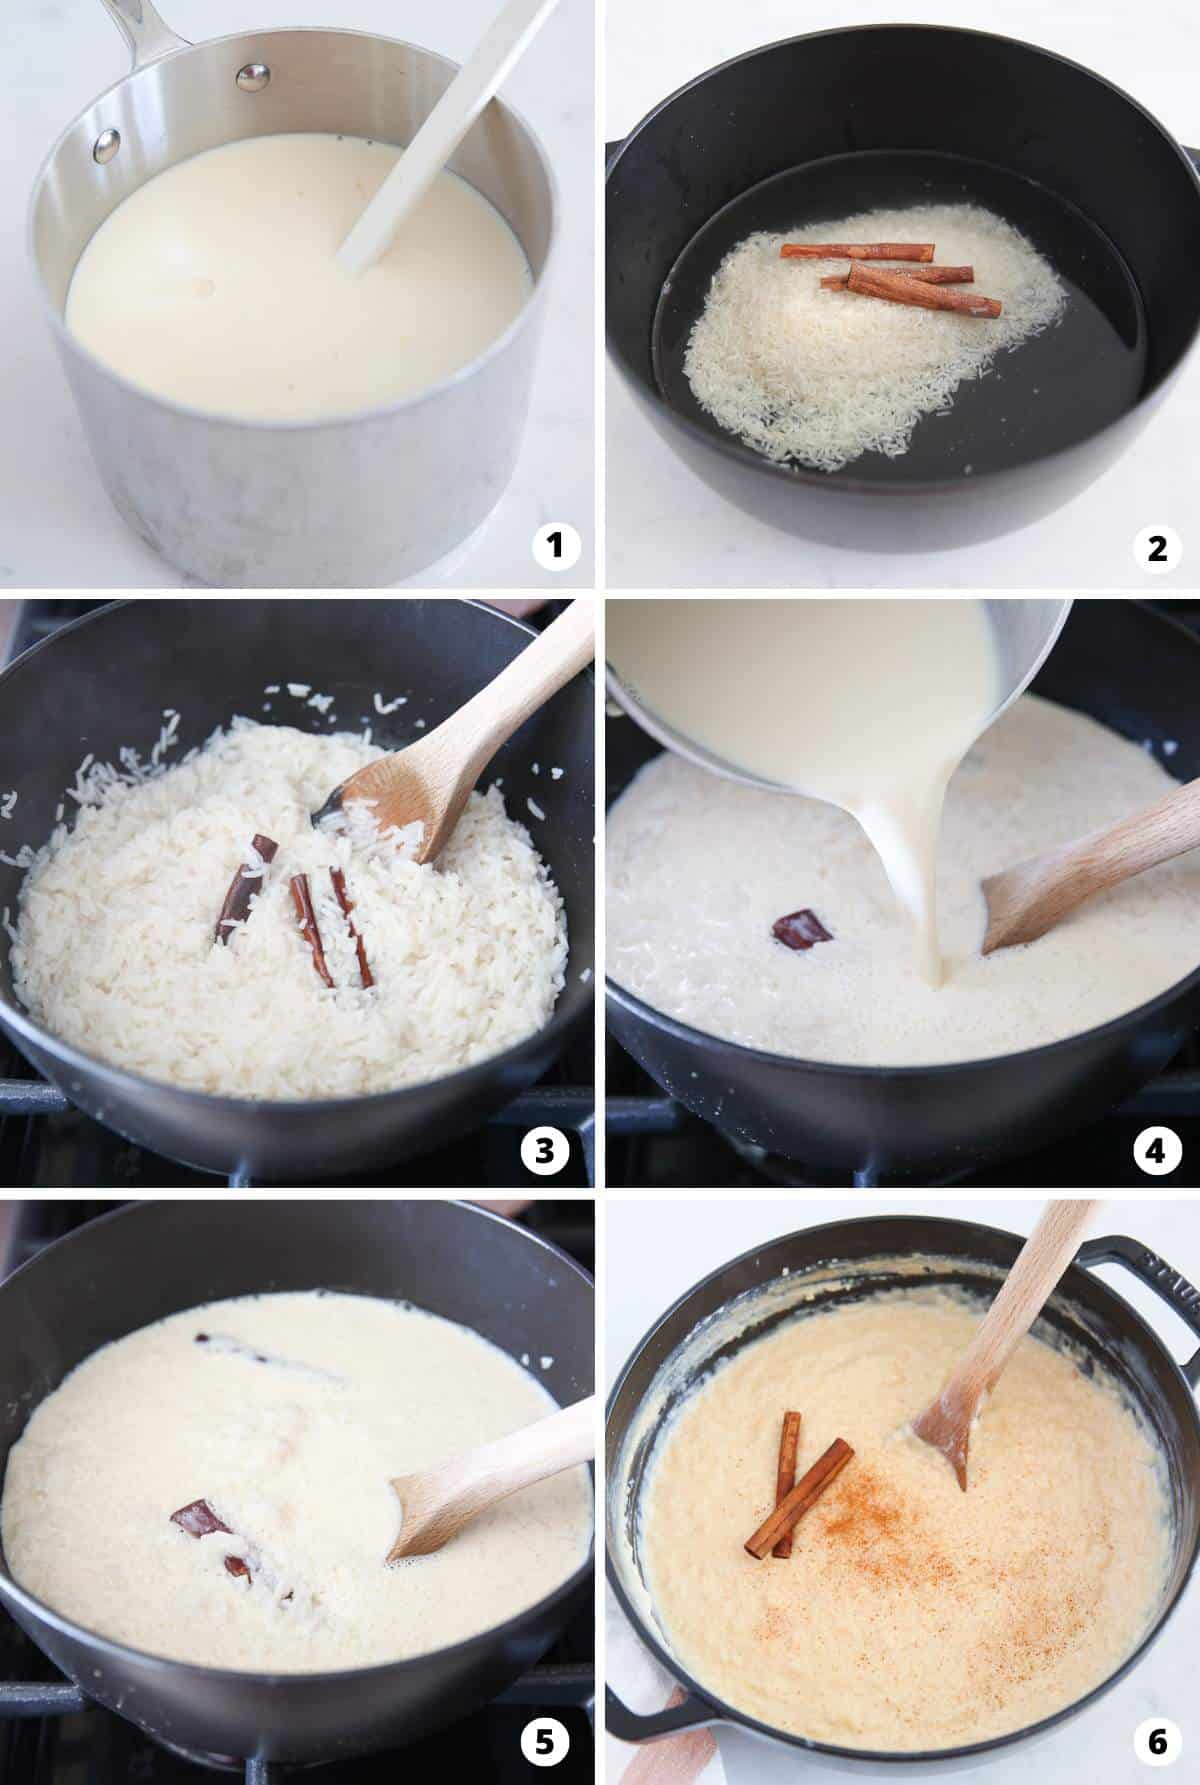 Showing how to make arroz con leche in a 6 step collage.